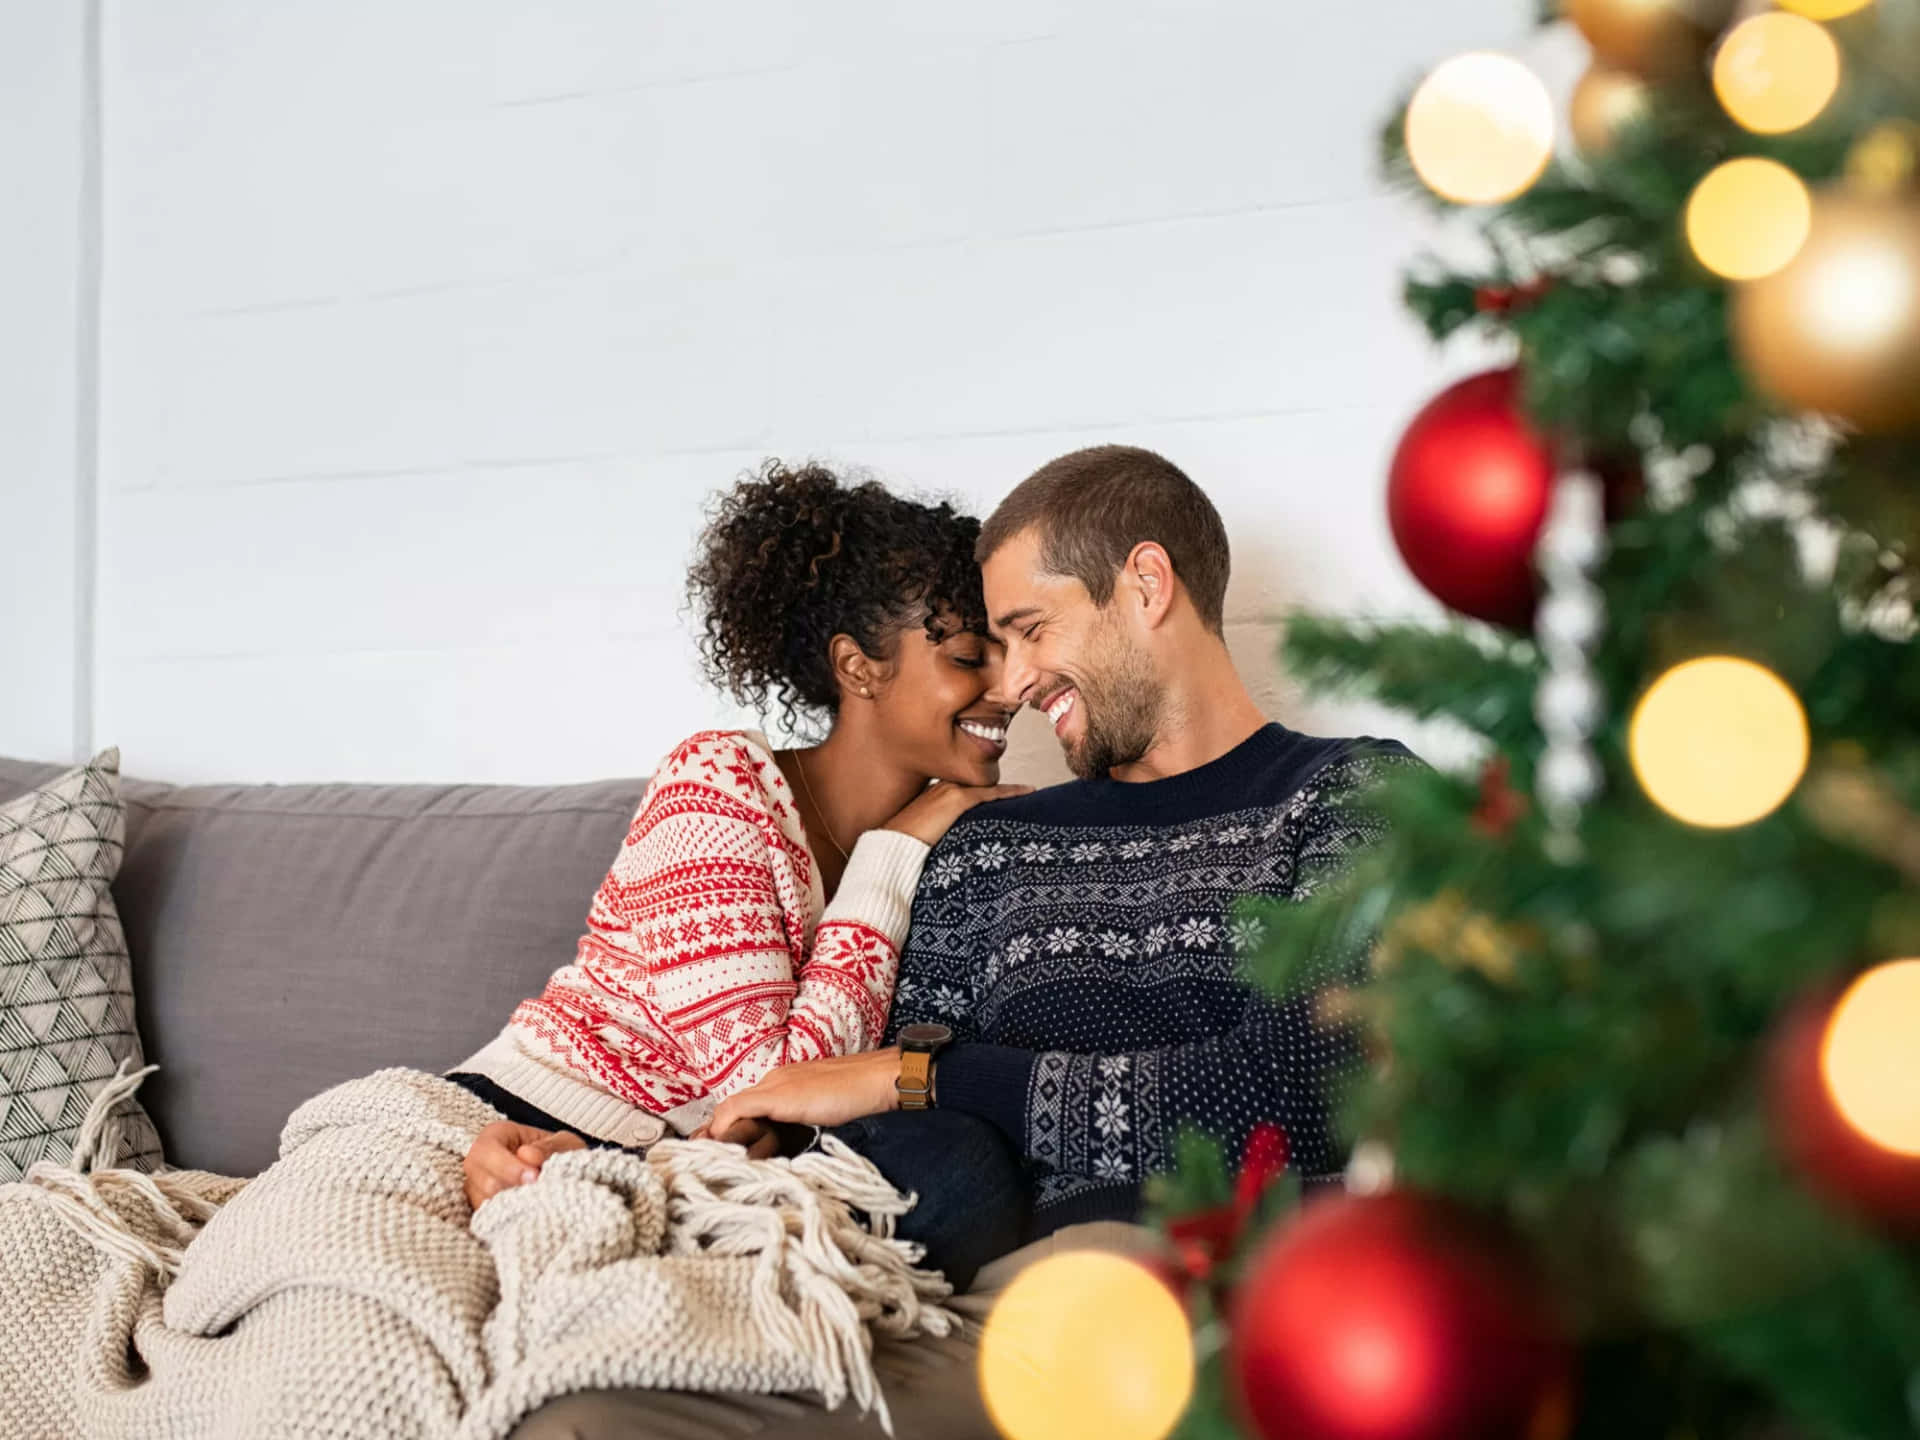 Celebrate Christmas together as a couple!